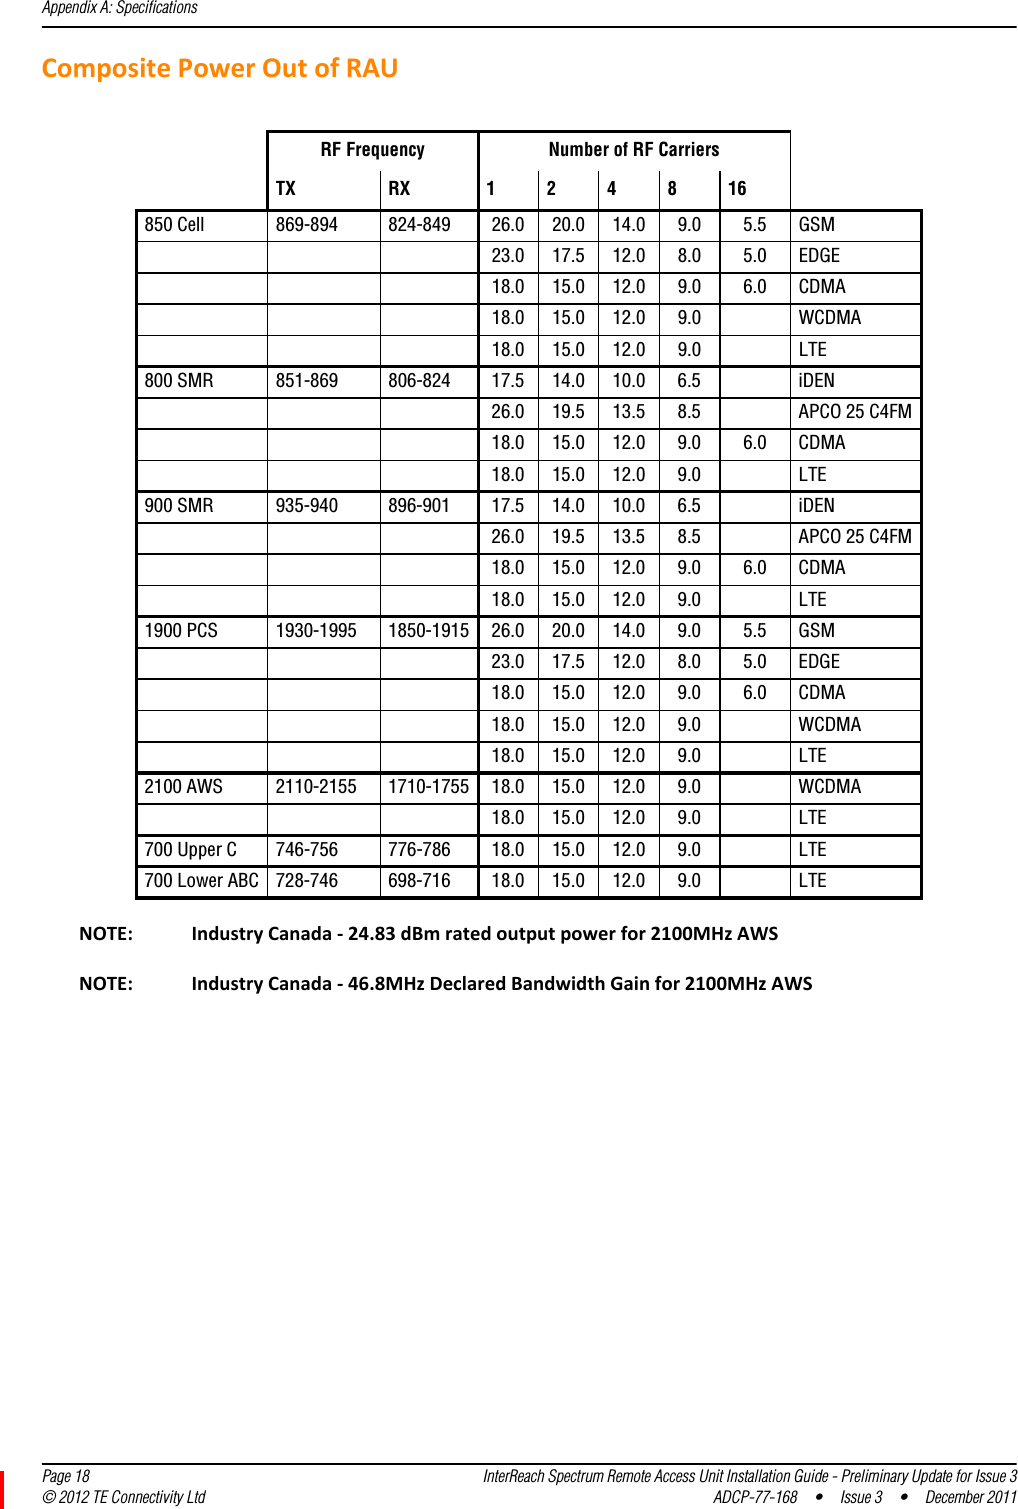 Appendix A: Specifications  Page 18 InterReach Spectrum Remote Access Unit Installation Guide - Preliminary Update for Issue 3© 2012 TE Connectivity Ltd ADCP-77-168 • Issue 3 • December 2011CompositePowerOutofRAURF Frequency Number of RF CarriersTX RX 1 2 4 8 16850 Cell 869-894 824-849 26.0 20.0 14.0 9.0 5.5 GSM23.0 17.5 12.0 8.0 5.0 EDGE18.0 15.0 12.0 9.0 6.0 CDMA18.0 15.0 12.0 9.0 WCDMA18.0 15.0 12.0 9.0 LTE800 SMR 851-869 806-824 17.5 14.0 10.0 6.5 iDEN26.0 19.5 13.5 8.5 APCO 25 C4FM18.0 15.0 12.0 9.0 6.0 CDMA18.0 15.0 12.0 9.0 LTE900 SMR 935-940 896-901 17.5 14.0 10.0 6.5 iDEN26.0 19.5 13.5 8.5 APCO 25 C4FM18.0 15.0 12.0 9.0 6.0 CDMA18.0 15.0 12.0 9.0 LTE1900 PCS 1930-1995 1850-1915 26.0 20.0 14.0 9.0 5.5 GSM23.0 17.5 12.0 8.0 5.0 EDGE18.0 15.0 12.0 9.0 6.0 CDMA18.0 15.0 12.0 9.0 WCDMA18.0 15.0 12.0 9.0 LTE2100 AWS 2110-2155 1710-1755 18.0 15.0 12.0 9.0 WCDMA18.0 15.0 12.0 9.0 LTE700 Upper C 746-756 776-786 18.0 15.0 12.0 9.0 LTE700 Lower ABC 728-746 698-716 18.0 15.0 12.0 9.0 LTENOTE: IndustryCanada‐24.83dBmratedoutputpowerfor2100MHzAWSNOTE: IndustryCanada‐46.8MHzDeclaredBandwidthGainfor2100MHzAWS